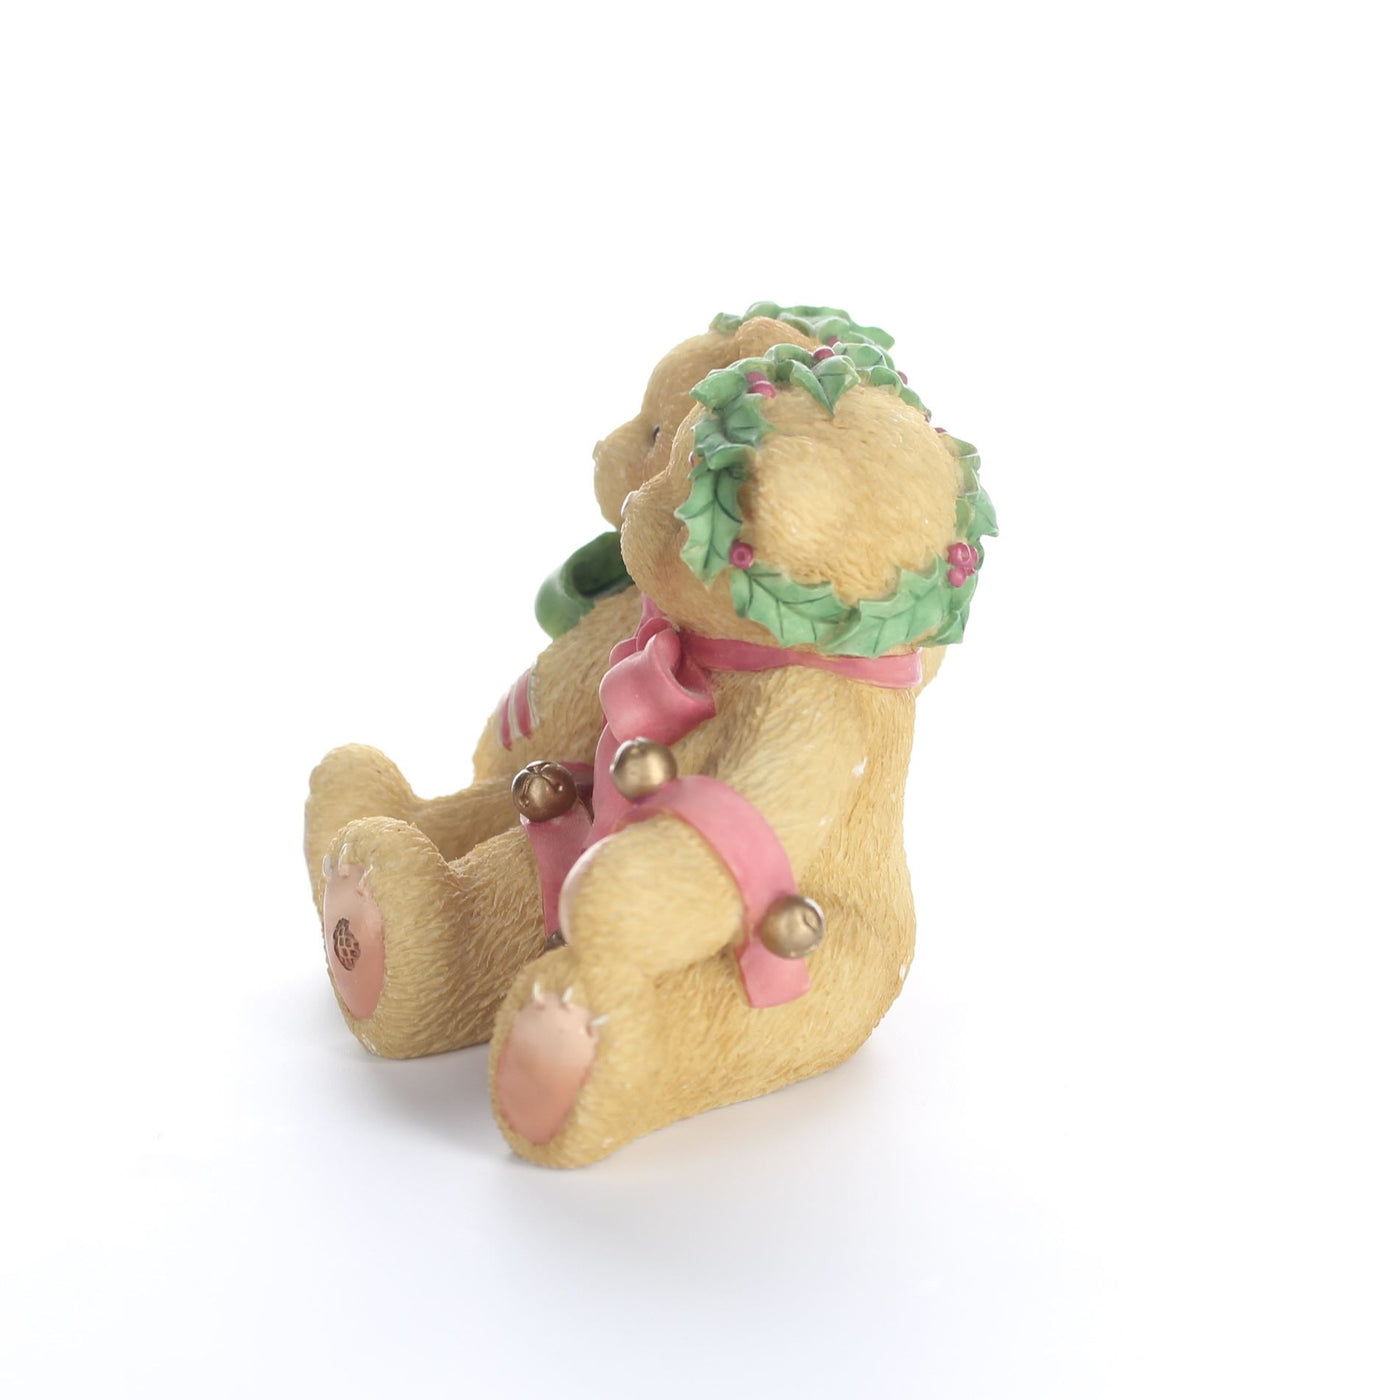 Cherished Teddies Vintage Christmas Figurine Ring In The Holidays With Me 1998